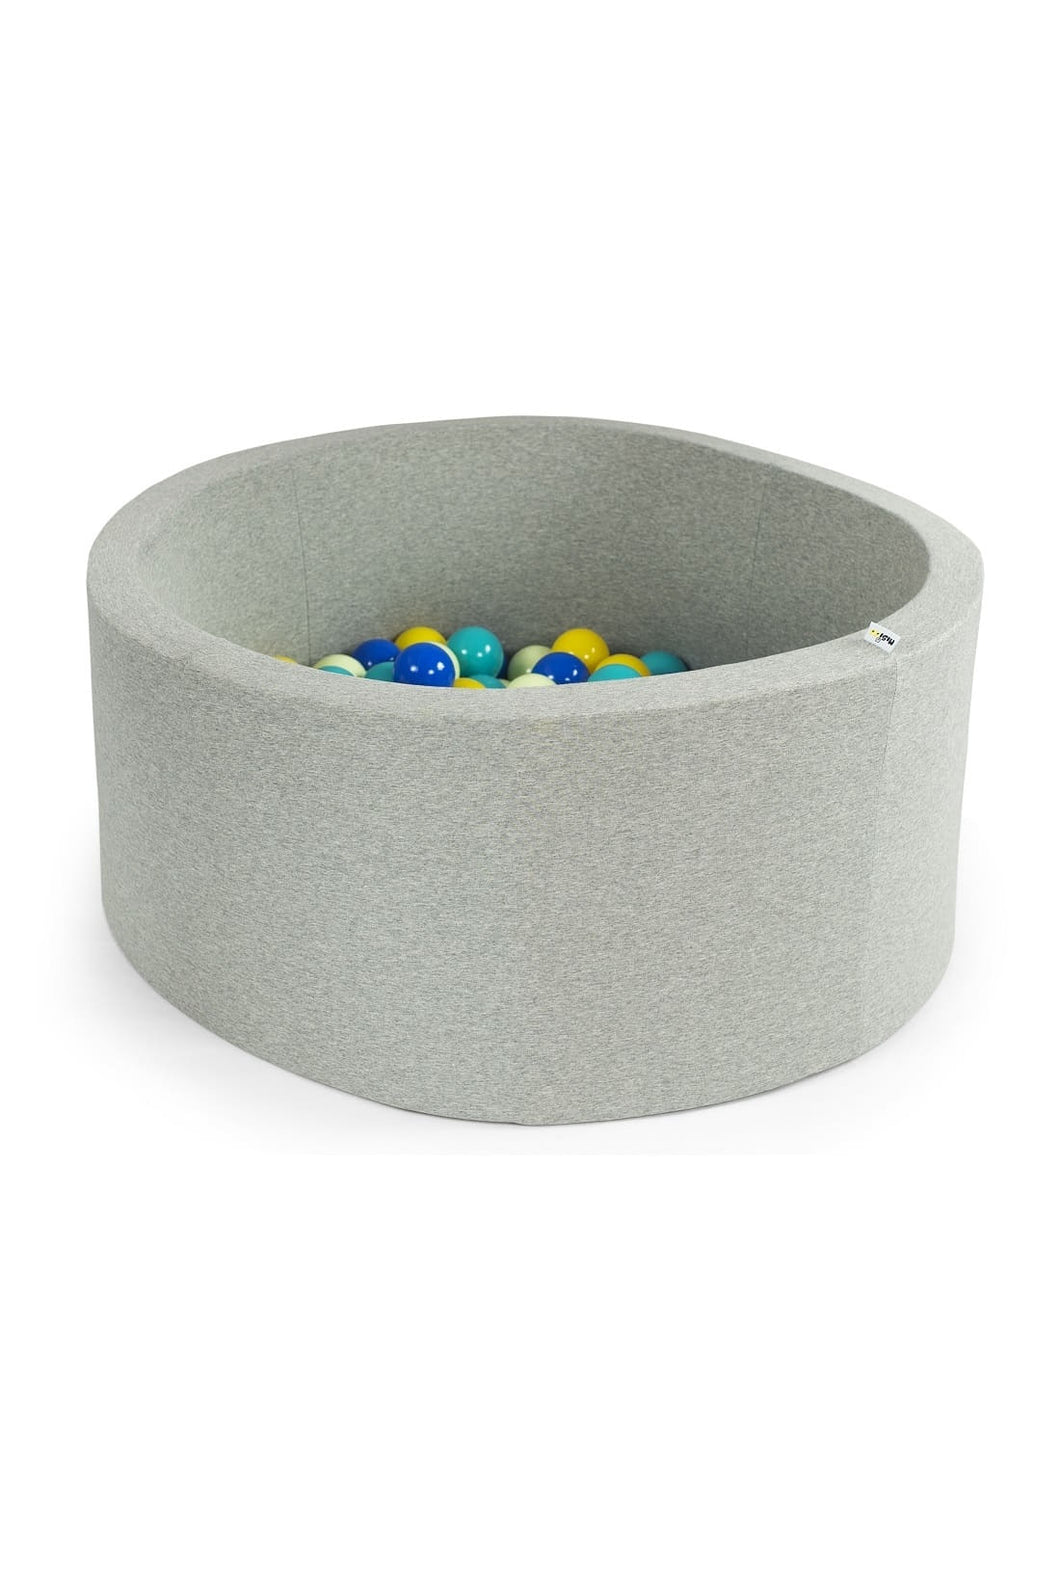 Misioo Ball Pits Round Grey Large 100 X 40 1